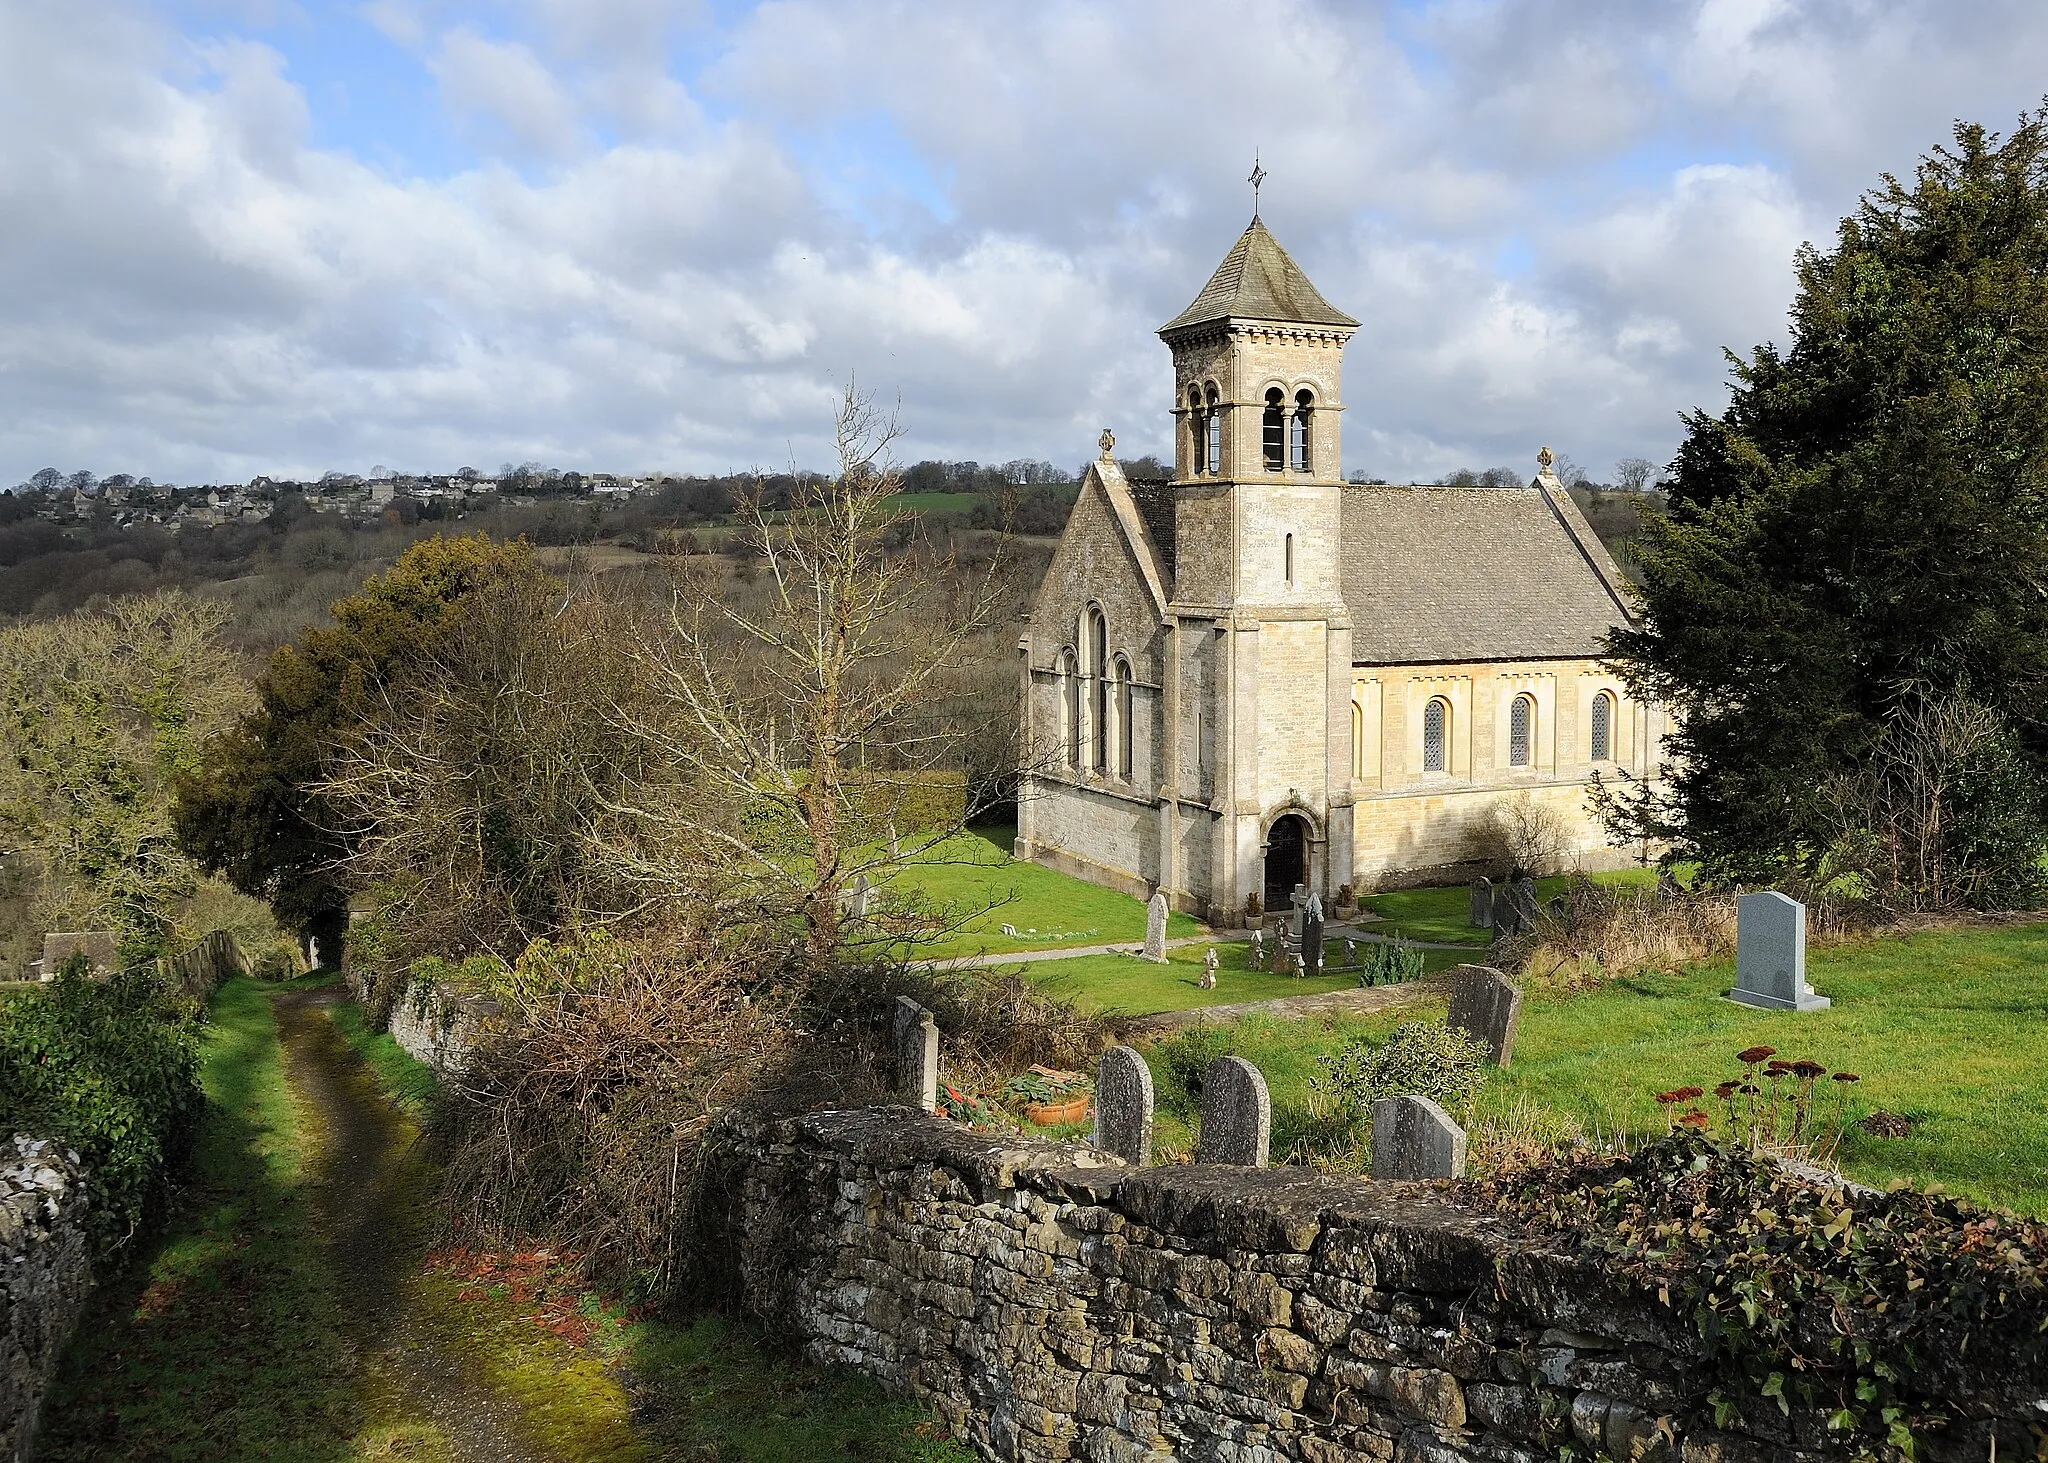 Photo showing: St Luke's Church in Frampton Mansell was built in 1843 by Lord Bathurst. The church sits on the top of a deep valley within the Cotswolds. The Italian style design is by J. Parish. There are a set of original five stained glass windows within the apse with one dedicated to Christ and one each for the apostles Matthew, Mark, Luke and John. 
St Luke's Church is an English Heritage Grade II Listed Building: http://list.english-heritage.org.uk/resultsingle.aspx?uid=1089675